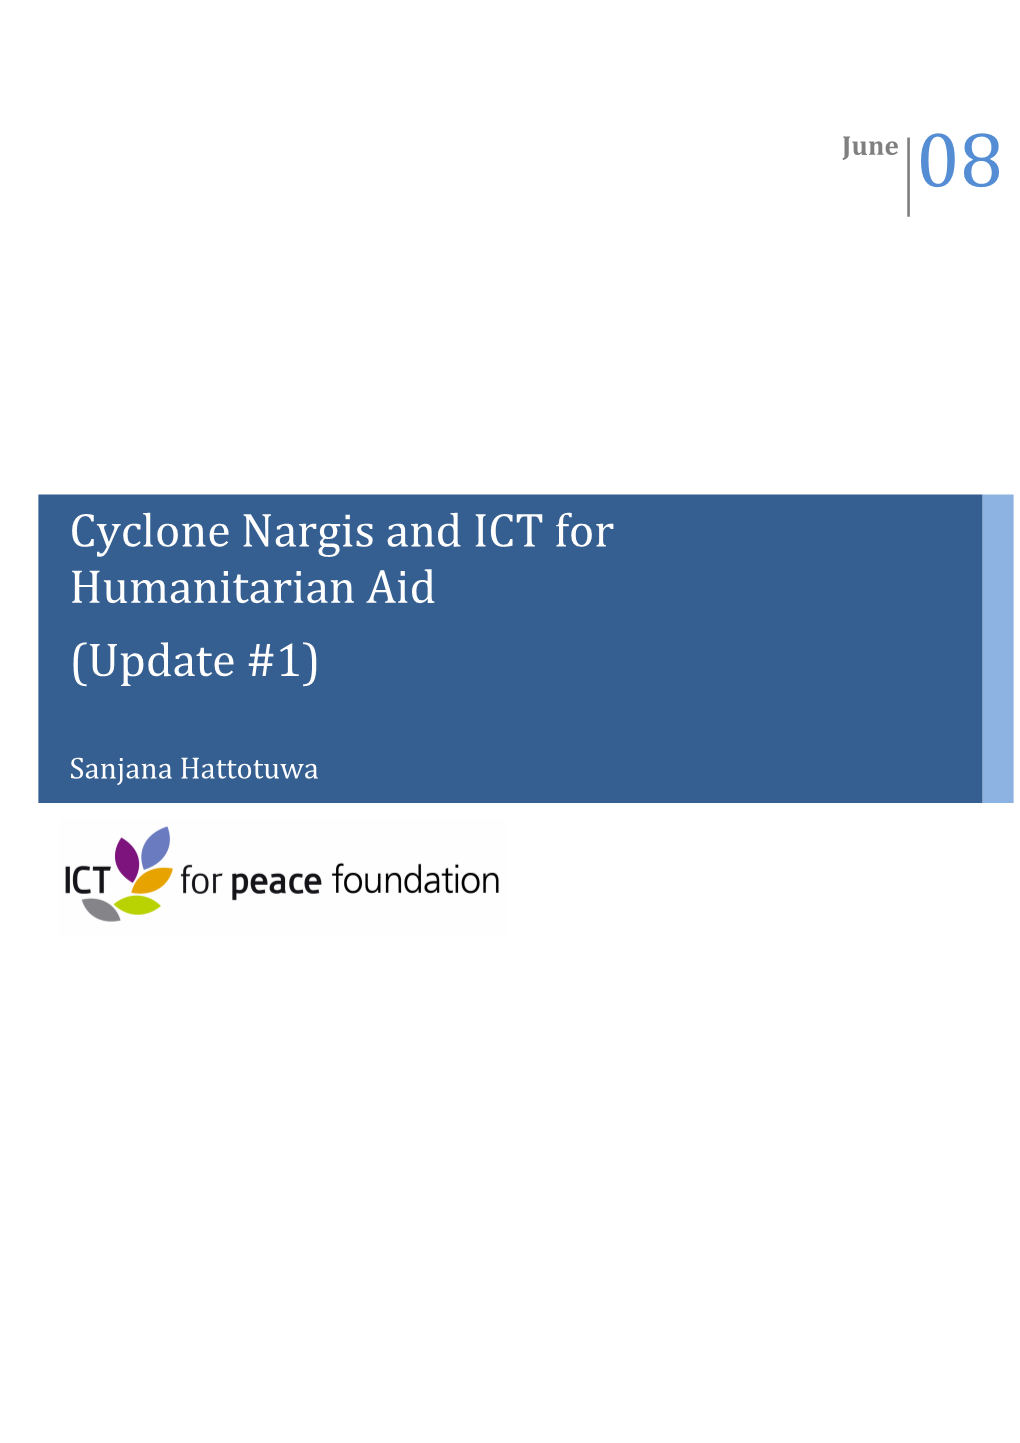 Cyclone Nargis and ICT for Humanitarian Aid (Update #1)